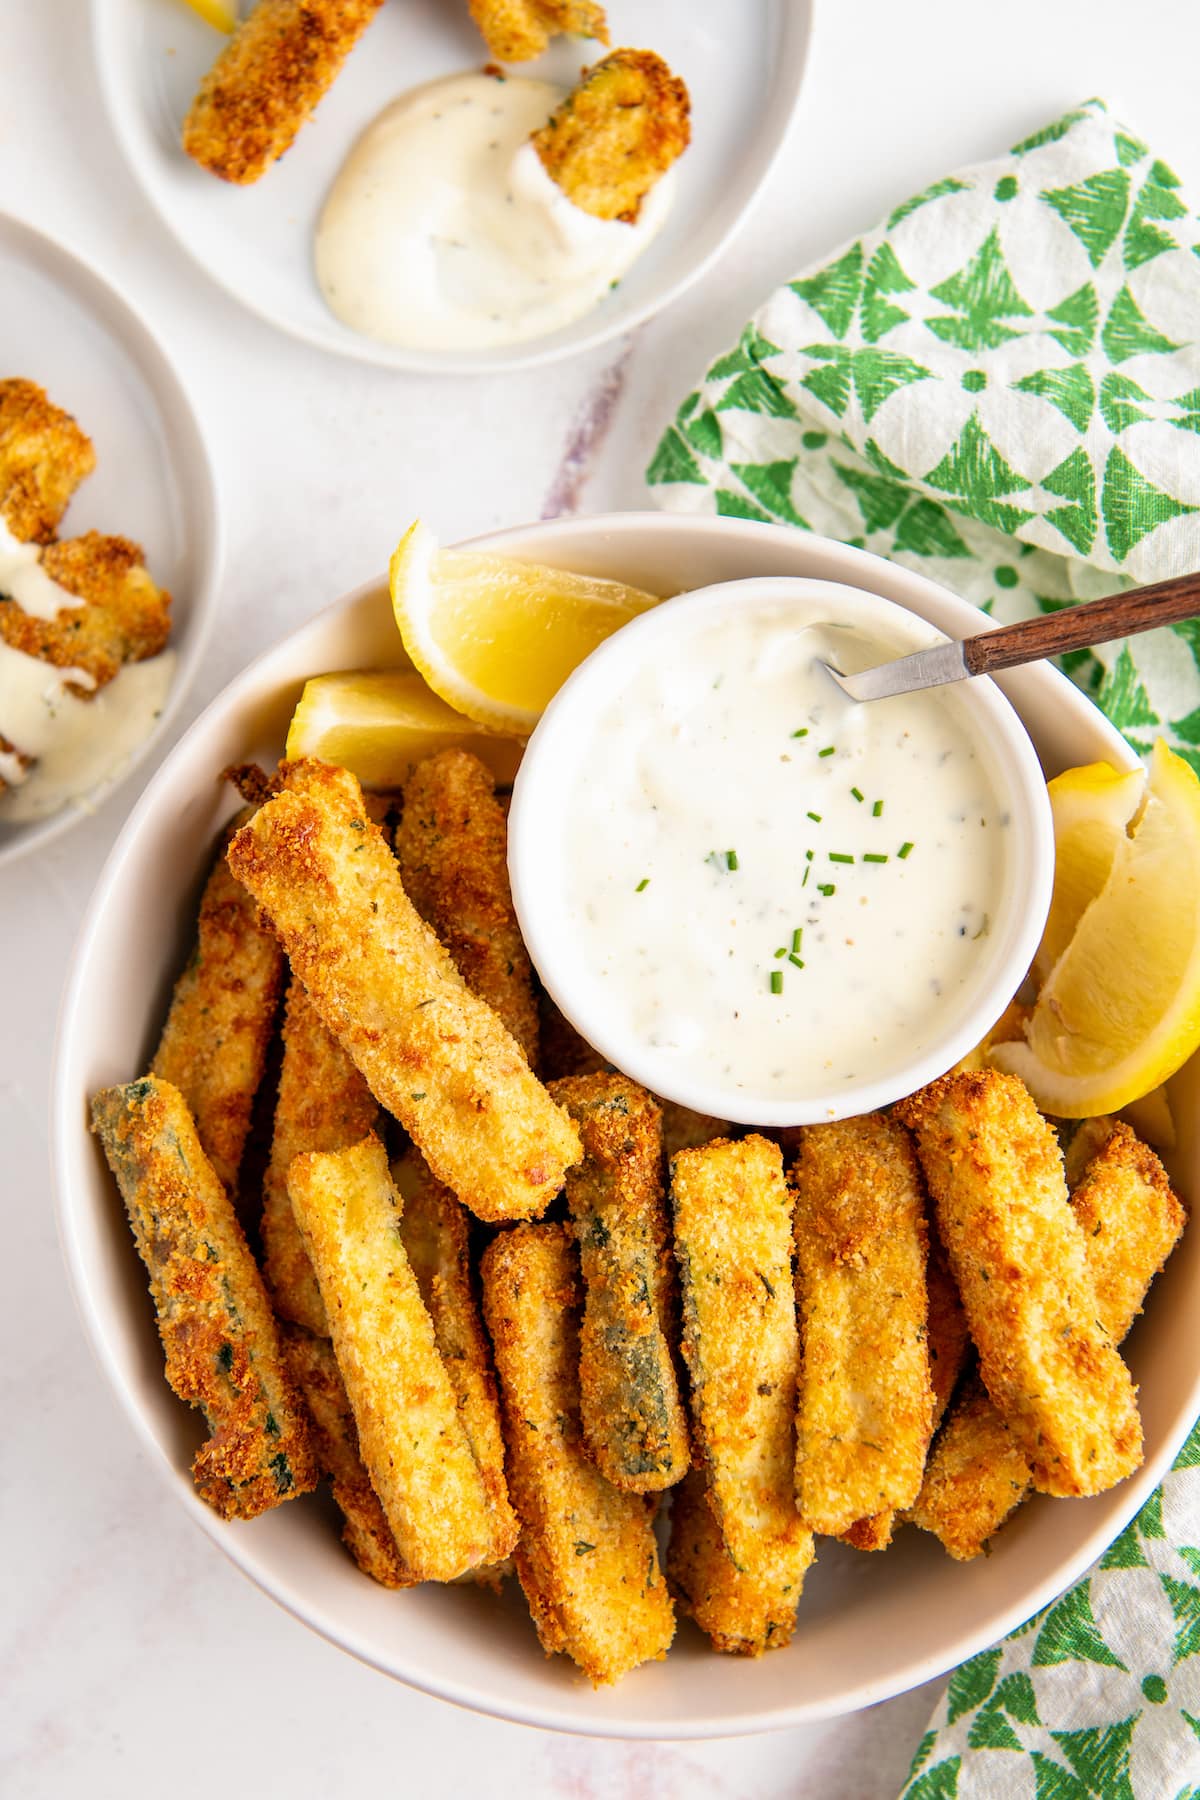 Overhead view of a plate of zucchini fries with a bowl of ranch dressing and some lemon slices